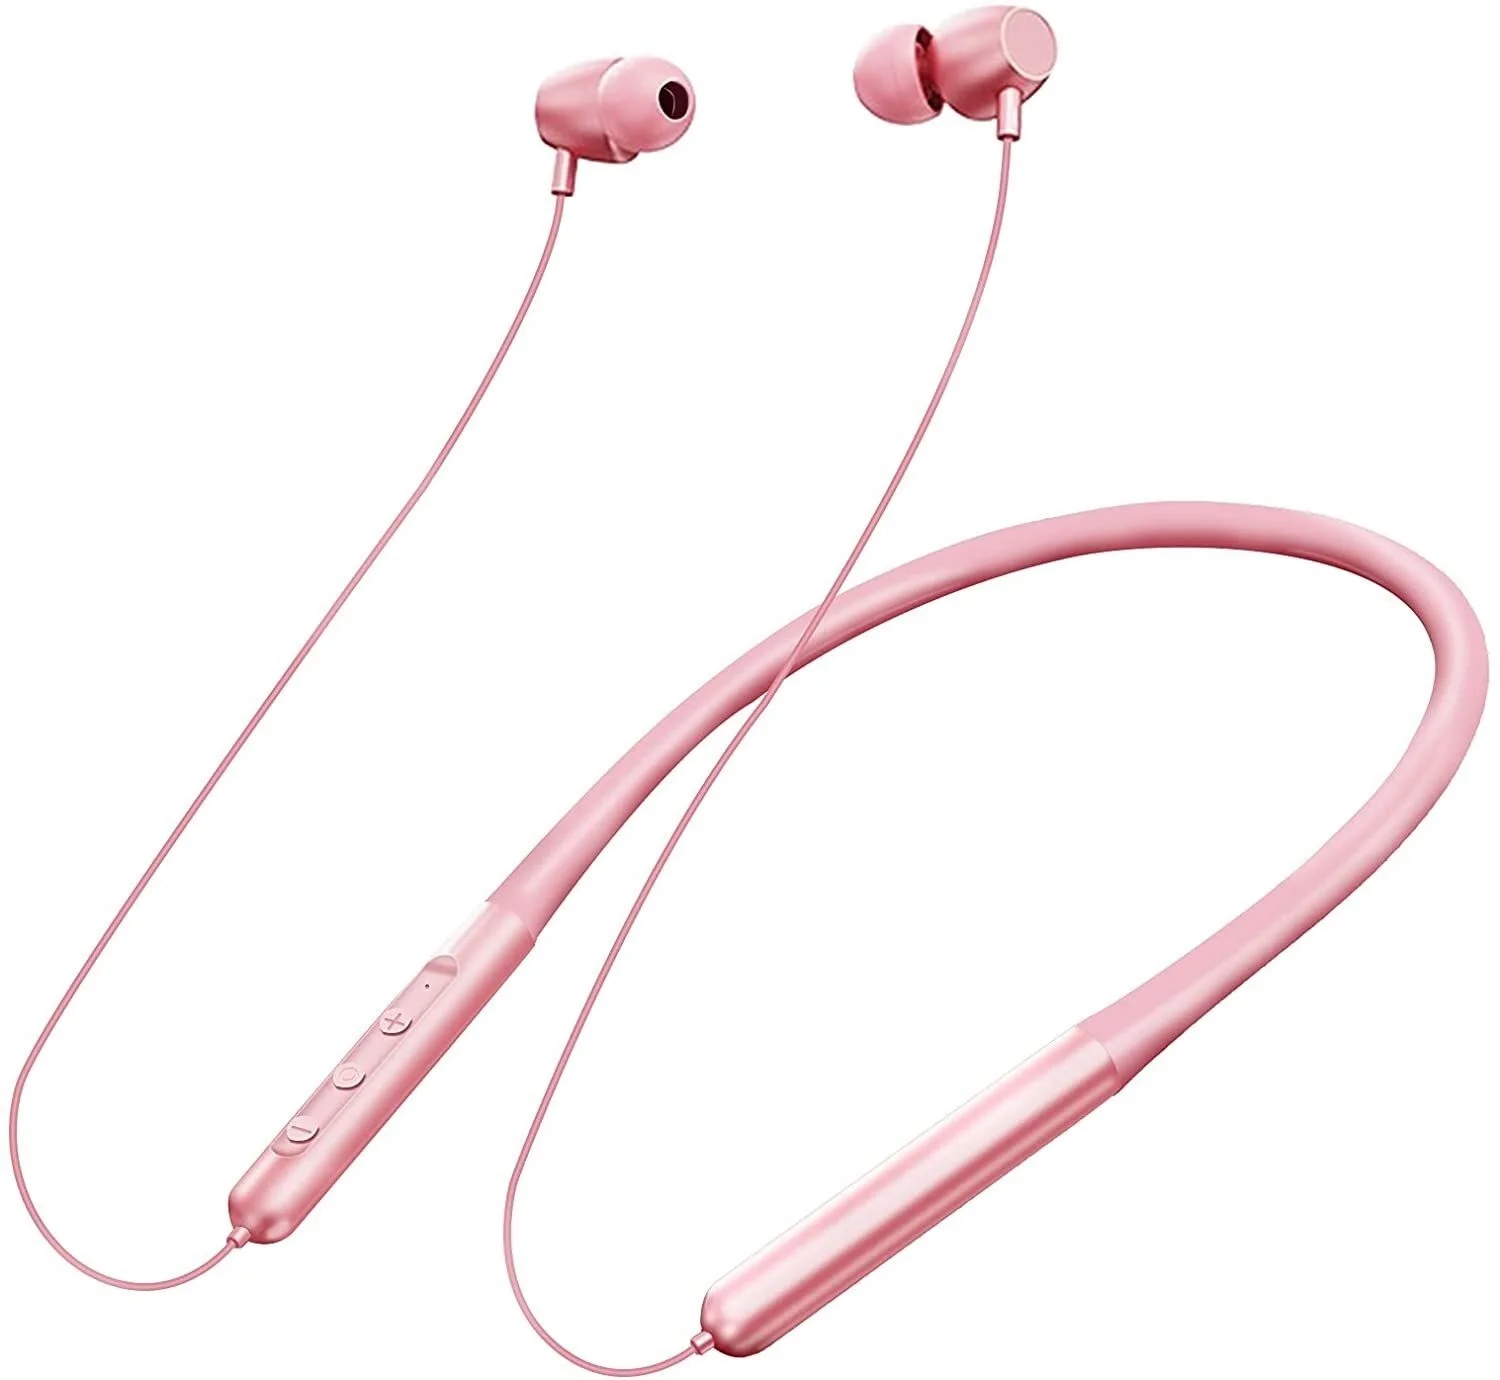 

deng Neckband , Wireless Neckband Earphones with 12 H Playtime, Hi-Fi Stereo Sound Deep Bass, Active Noise Cancellation 017